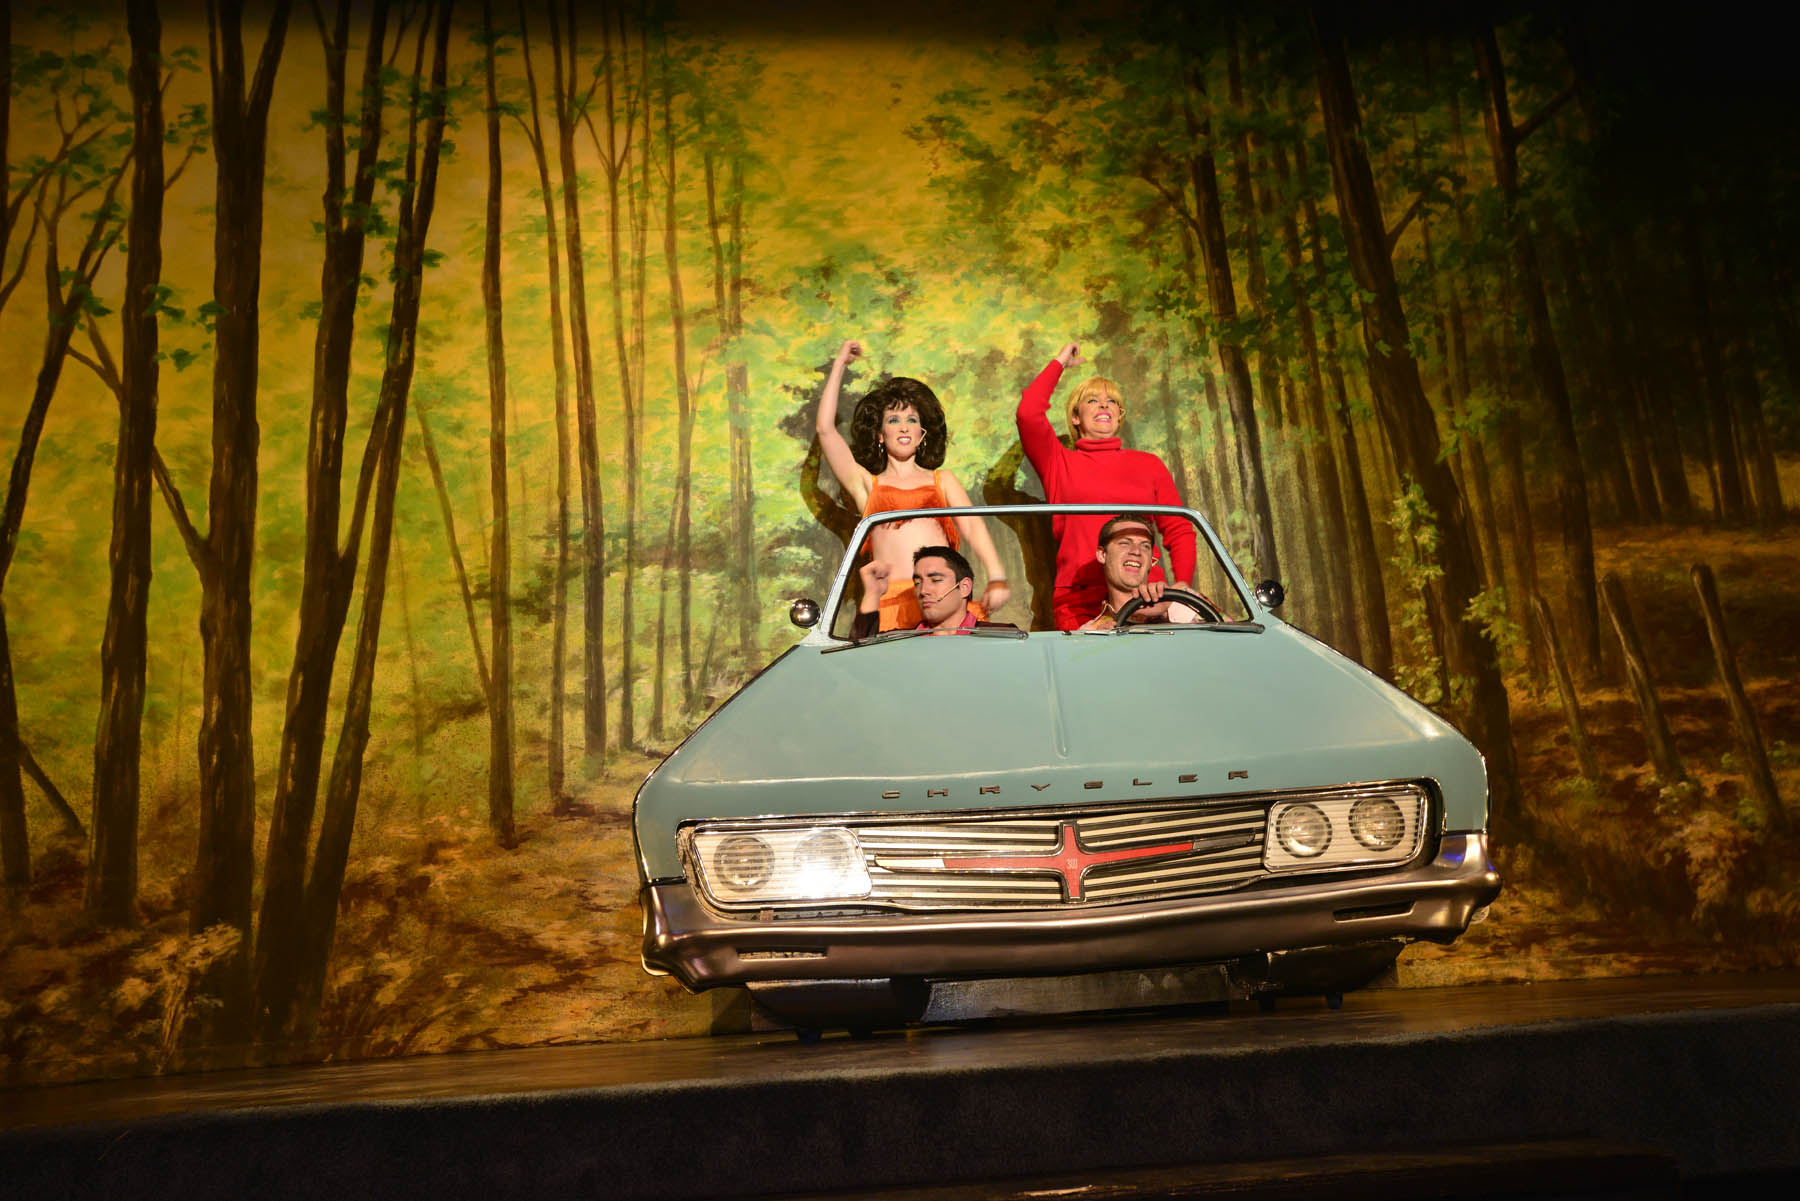 Performers on stage in a fake car.